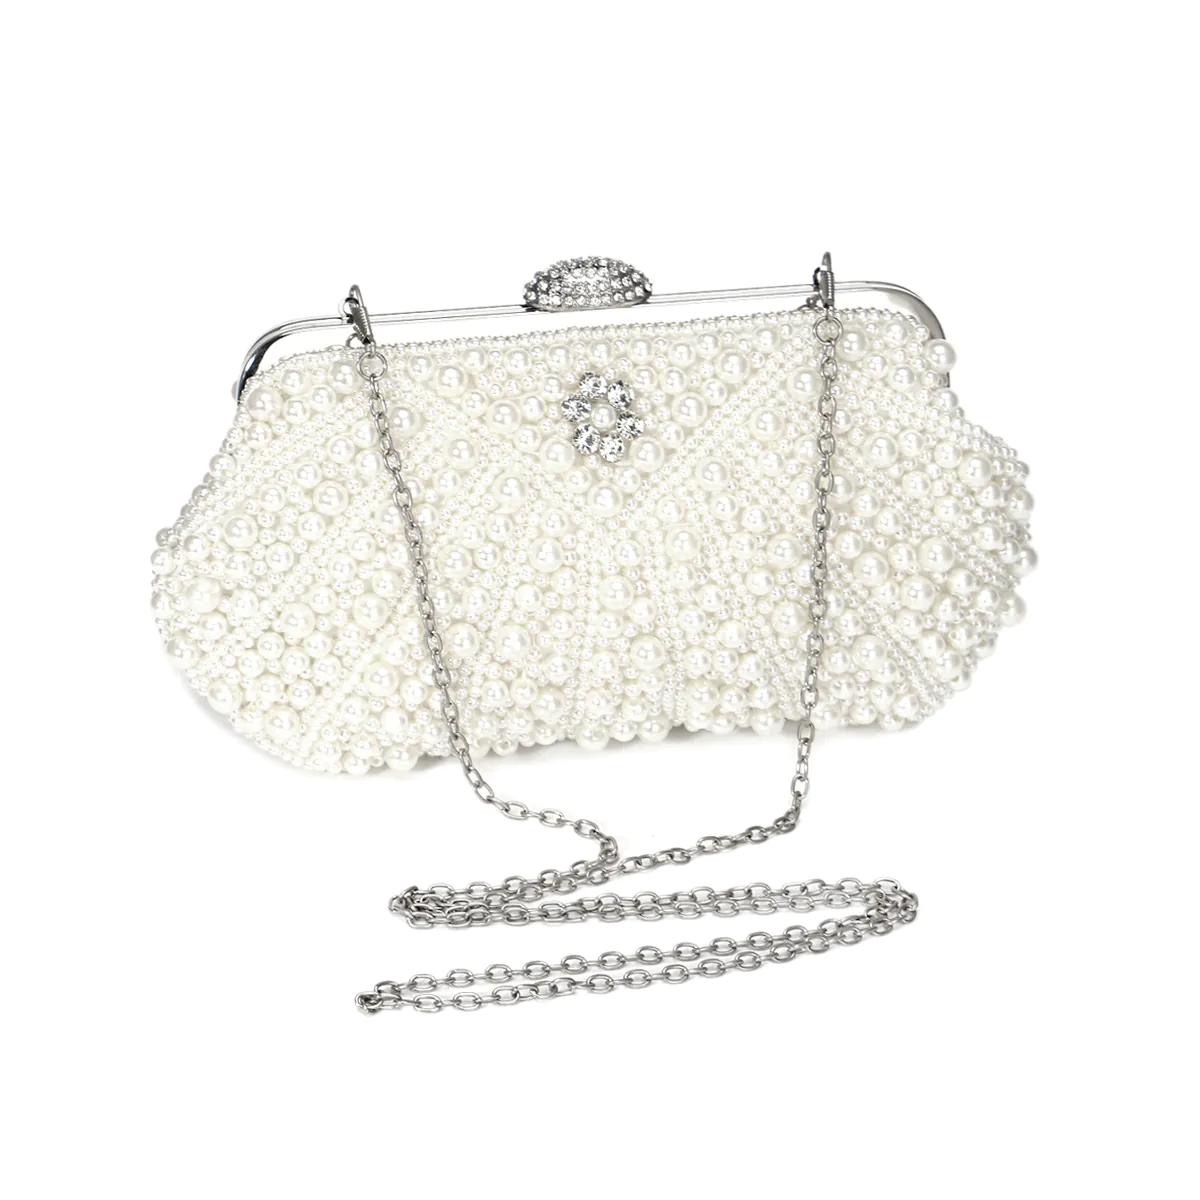 Pearl Beaded Evening Clutch Bag Purse for Wedding Party Prom04